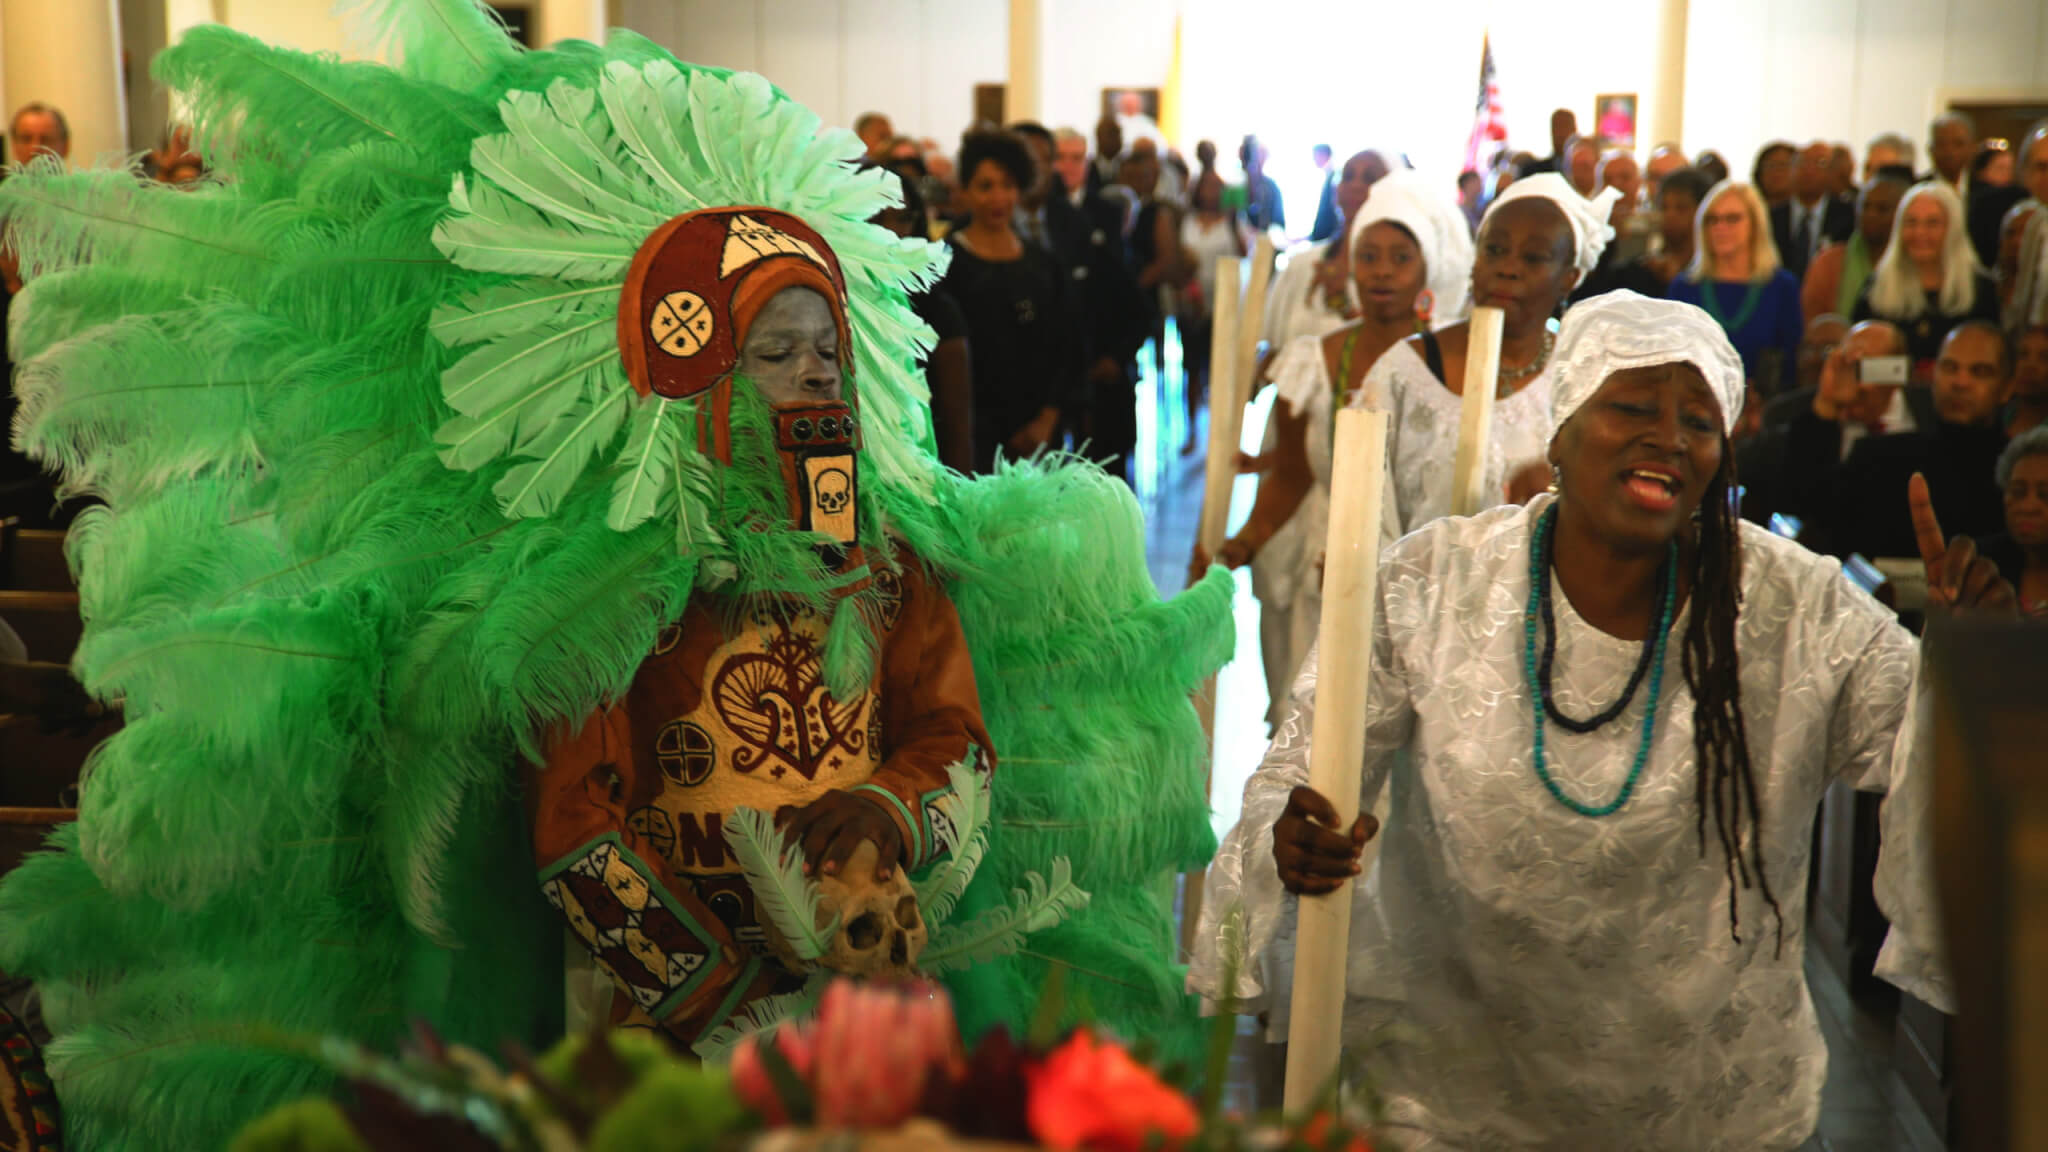 City Of A Million Dreams: Parading For The Dead in New Orleans